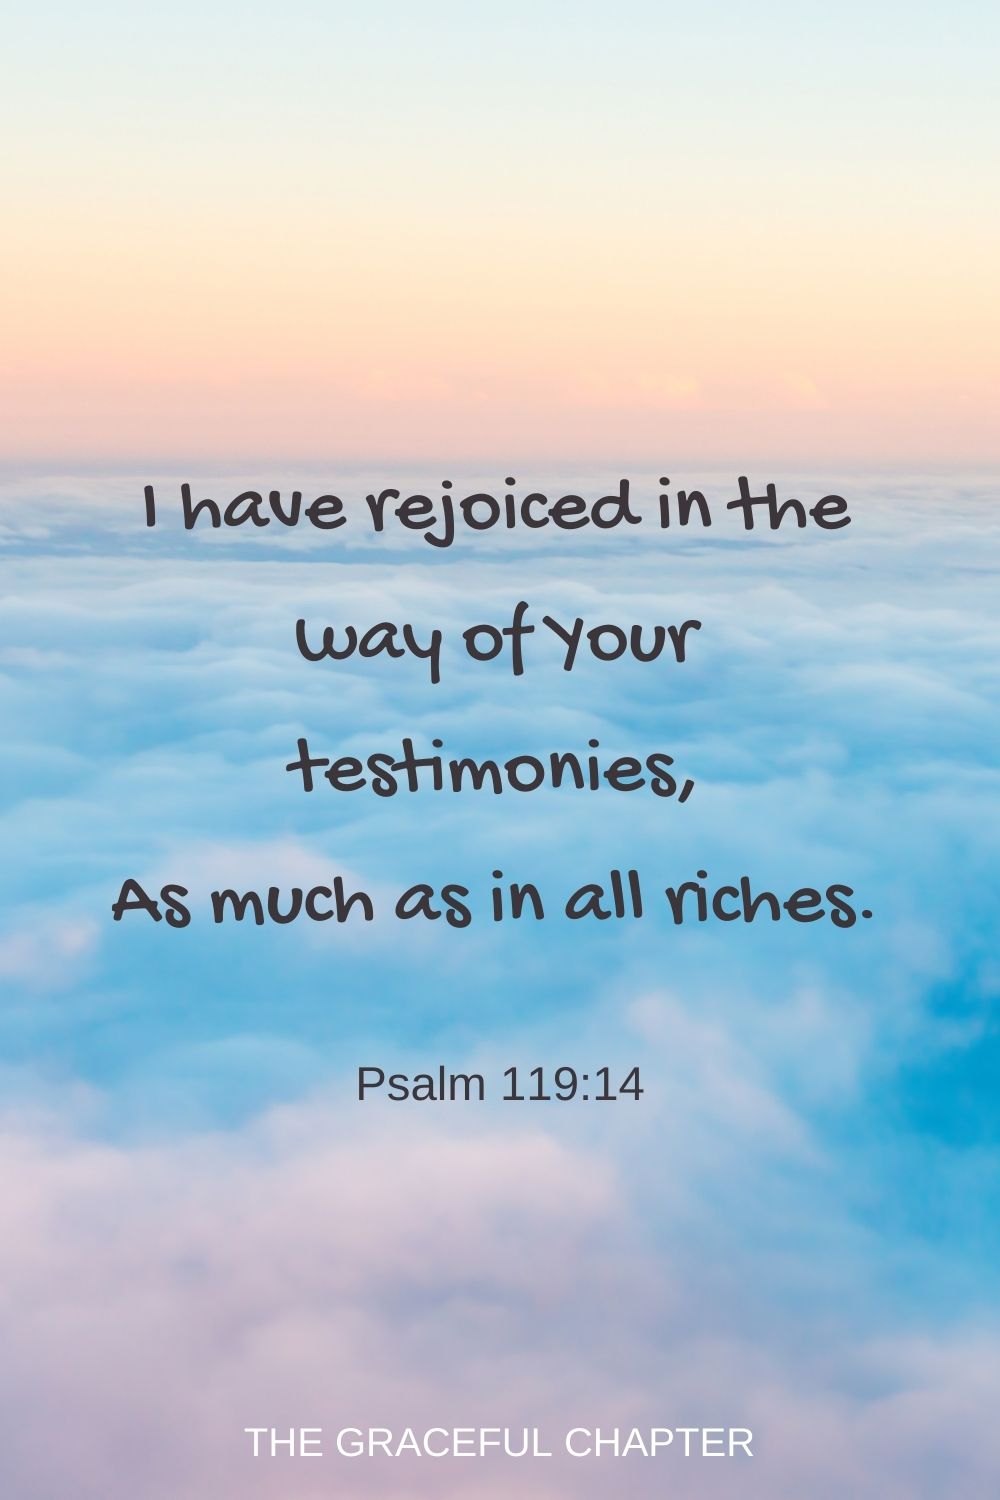 I have rejoiced in the way of Your testimonies, As much as in all riches. Psalm 119:14